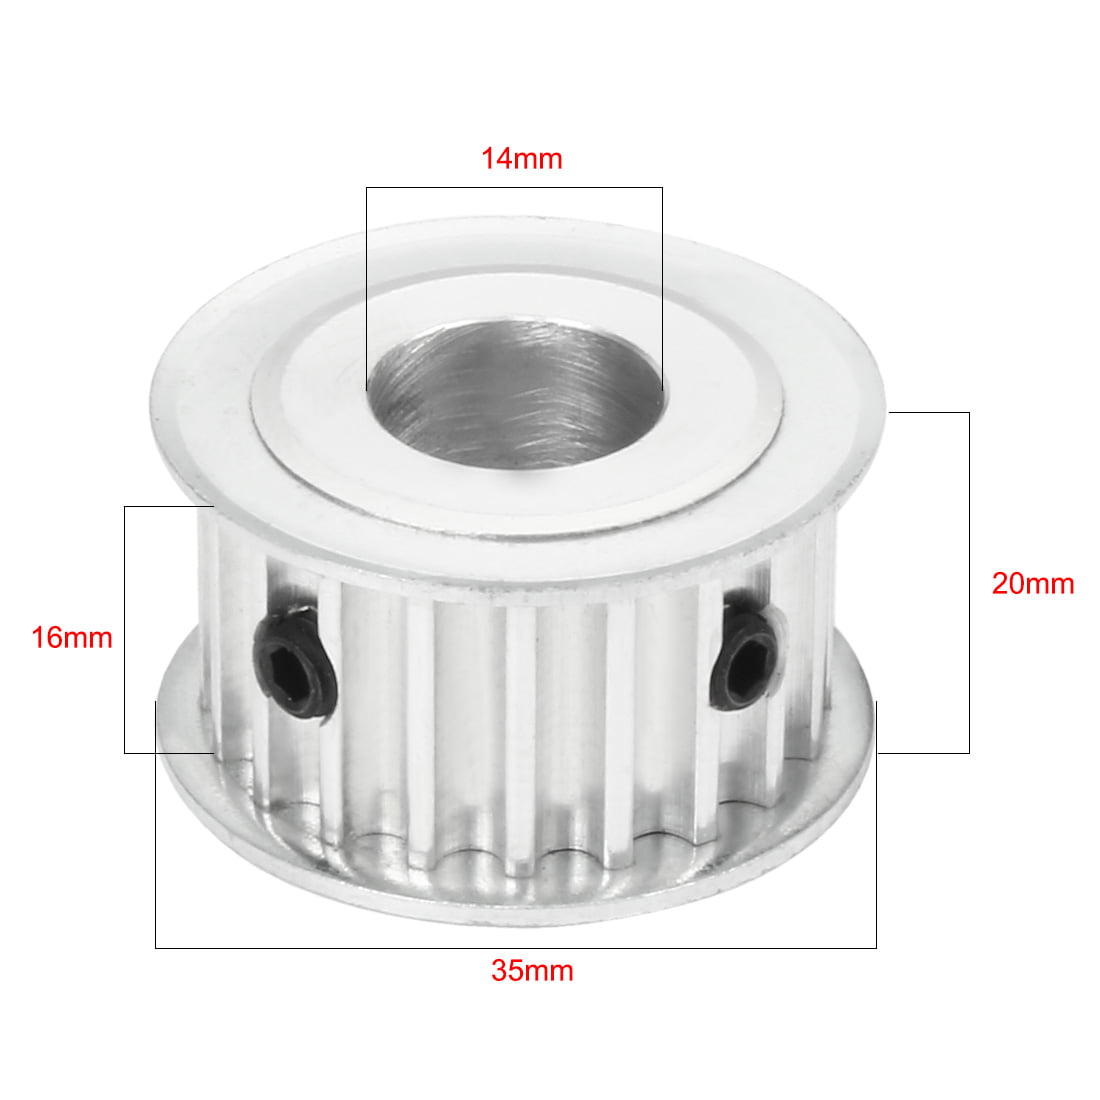 Details about   40mm Outer Diameter Aluminum 6 Teeth 14mm Bore Belt Pulley Wheel 